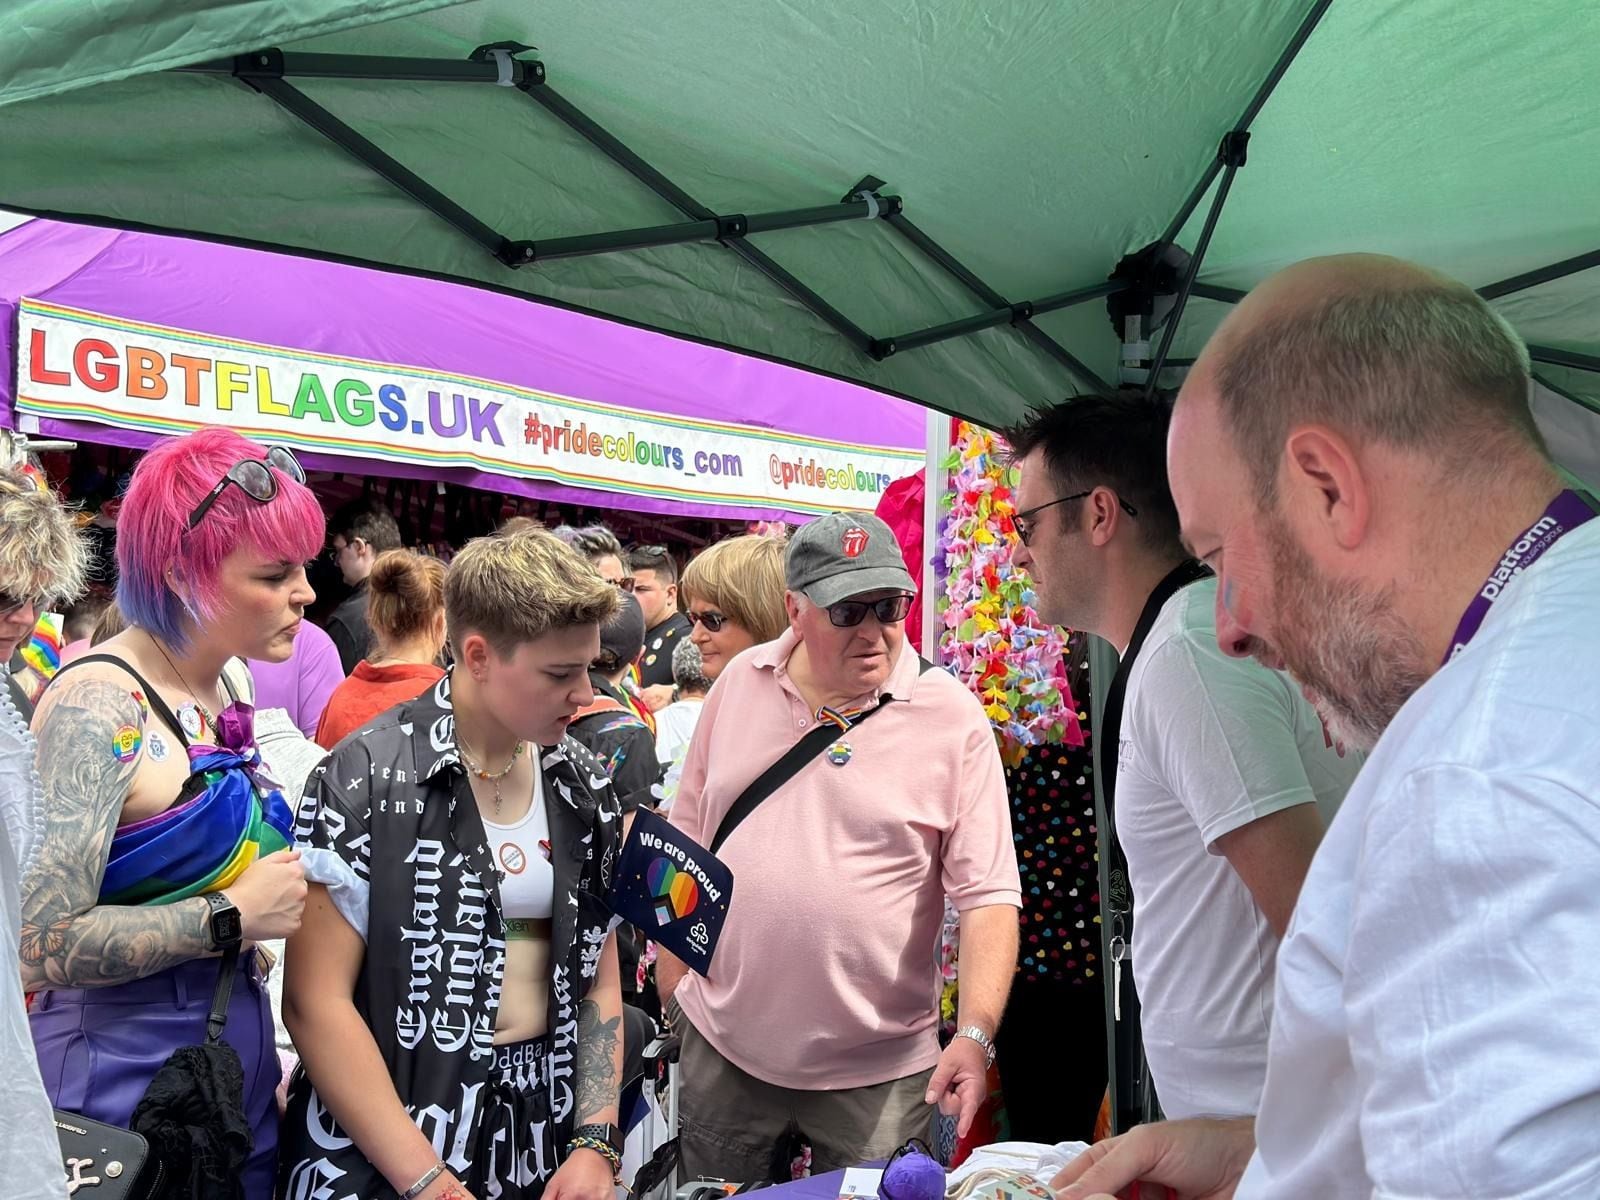 Housing association supporting Pride event this weekend